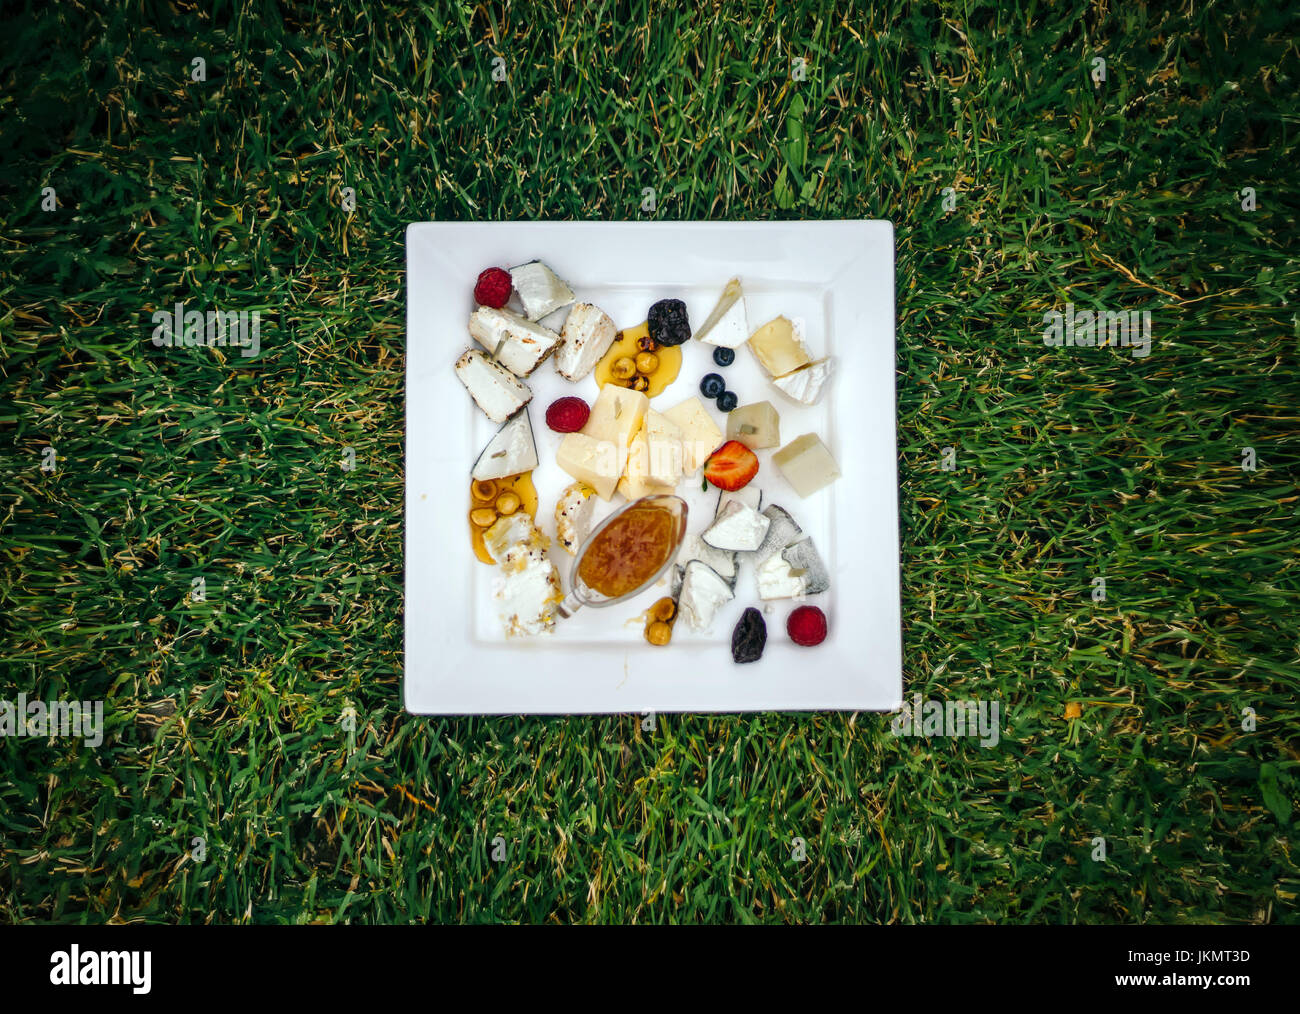 Cheese plate with many kinds of cheese. Exposed on a beautifully trimmed lawn, on a warm summer day. Top view. Stock Photo